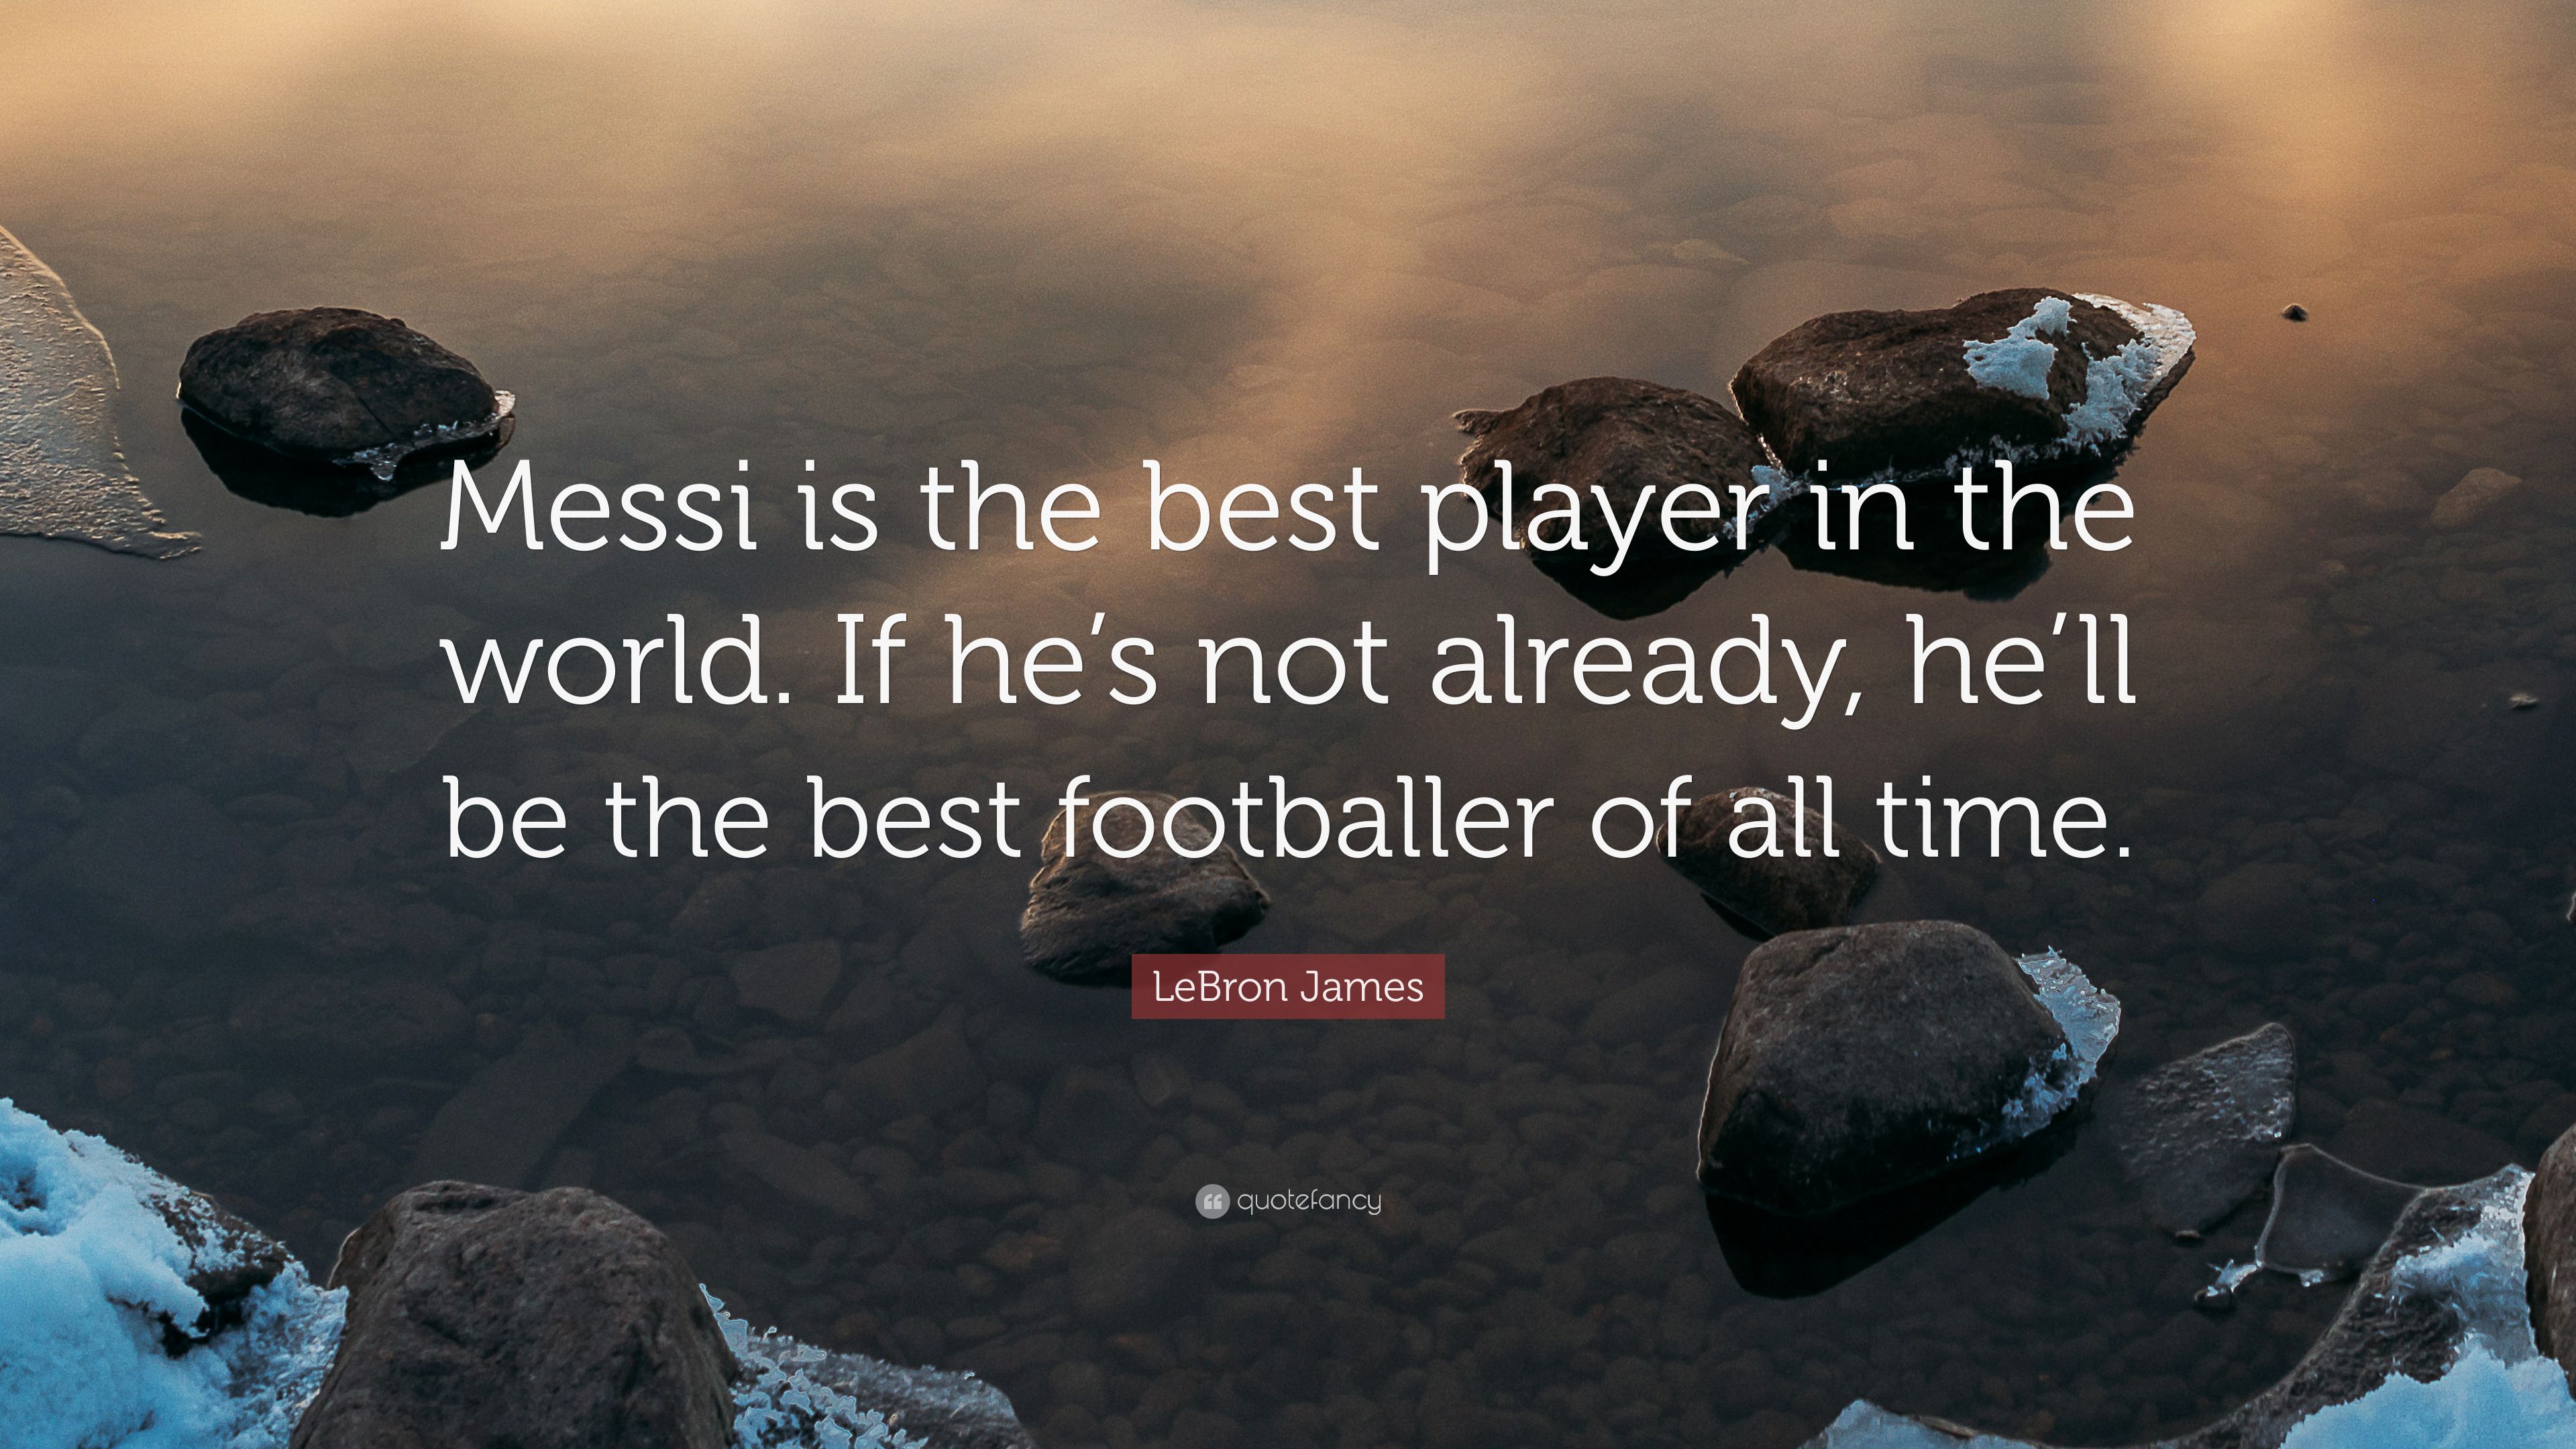 LeBron James Quote: “Messi is the best player in the world. If